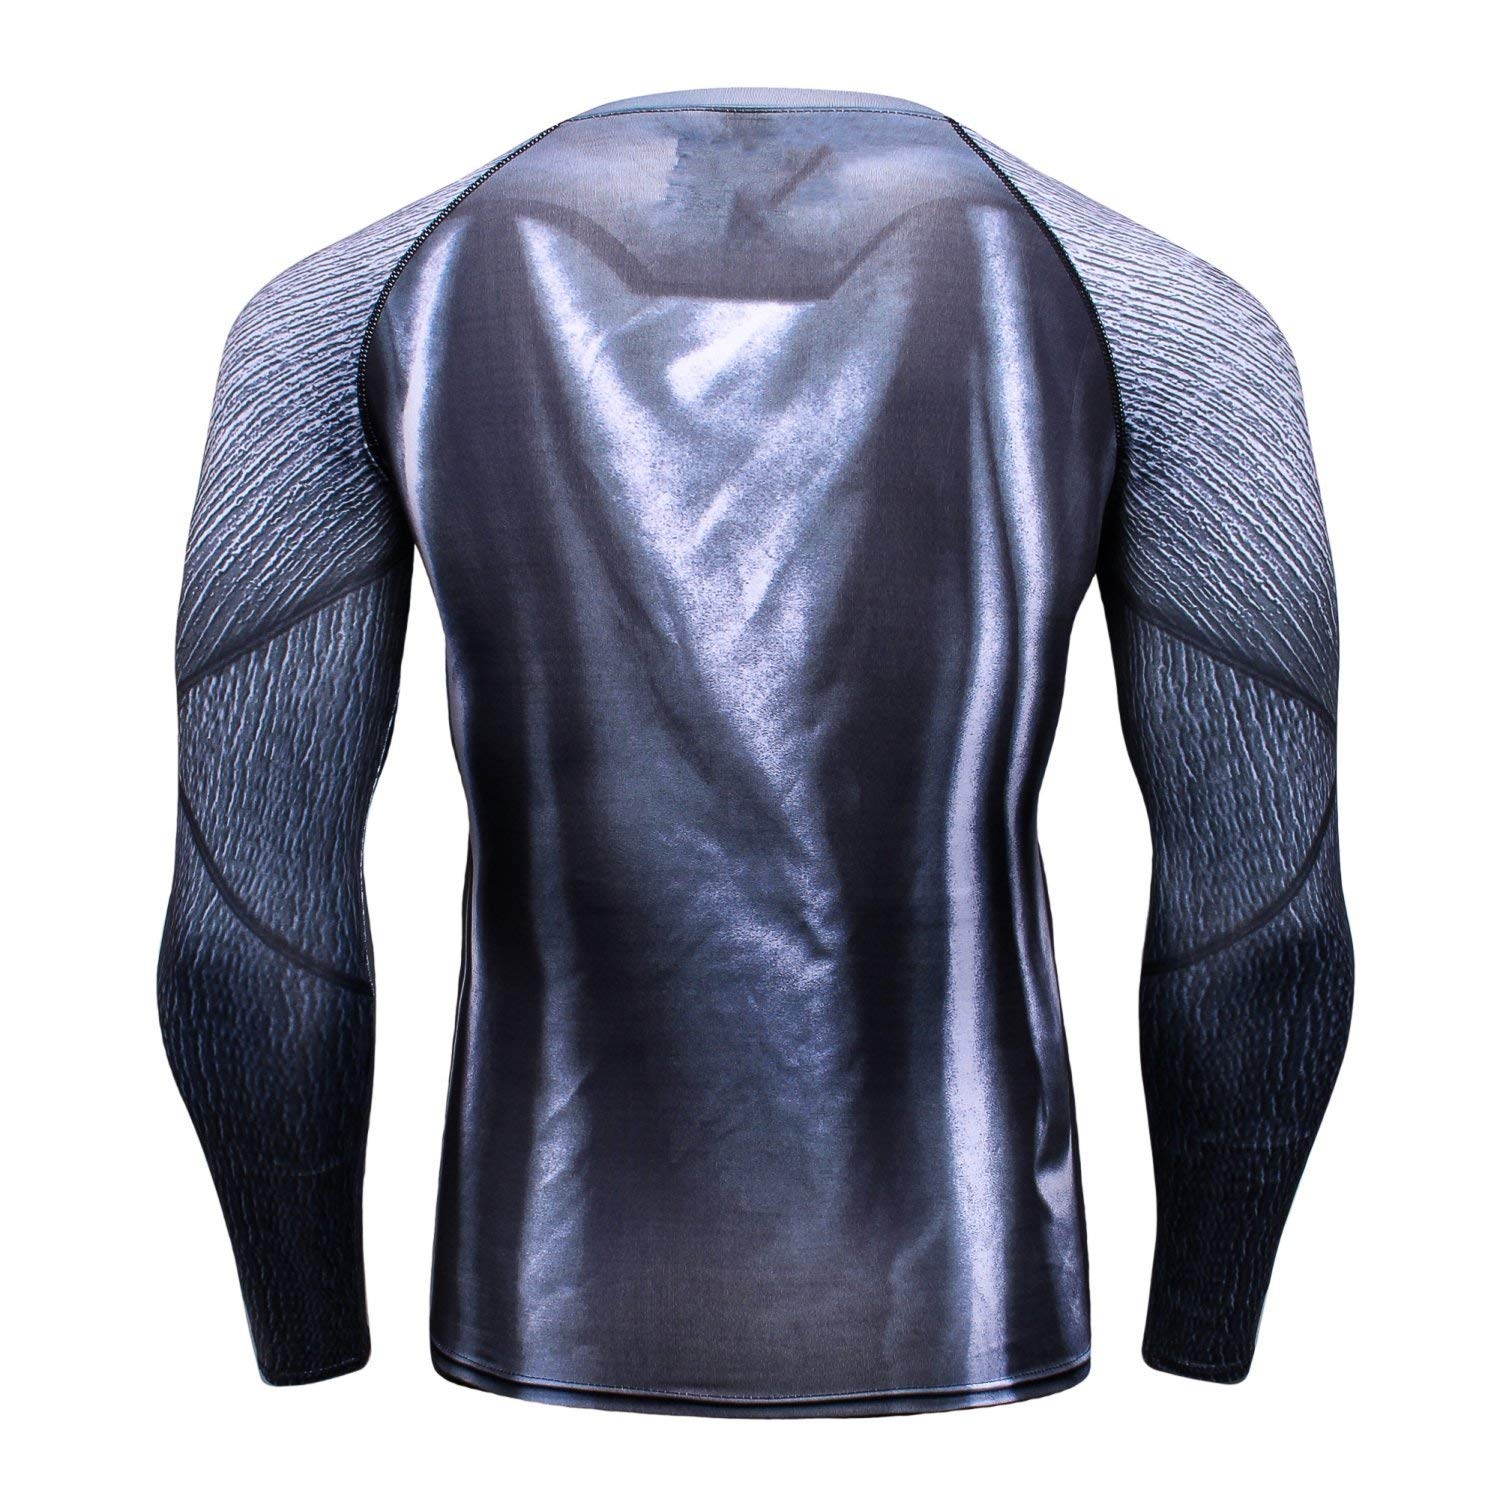 Red Plume Men's Sports Shirt Cool Party/Gift Running Cosplay Costumes Fitness Long Sleeve Tee Dry Quickly Gym t-Shirts